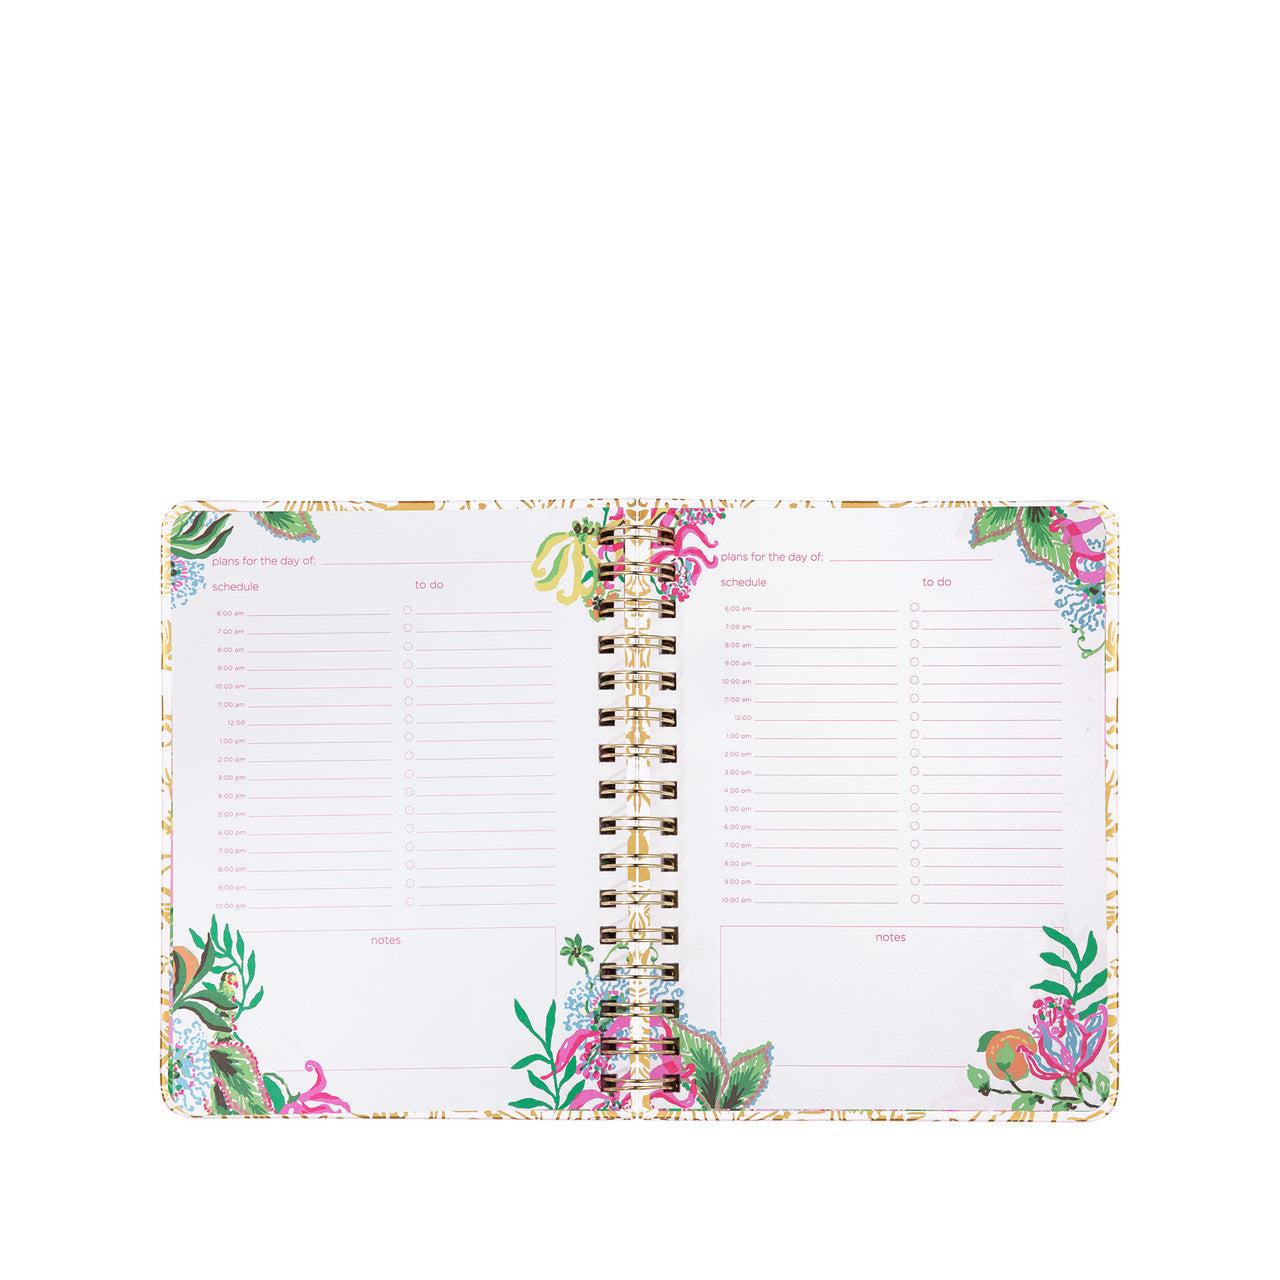 Lilly Pulitzer To Do Planner, Gold Metallic Dandy Lions